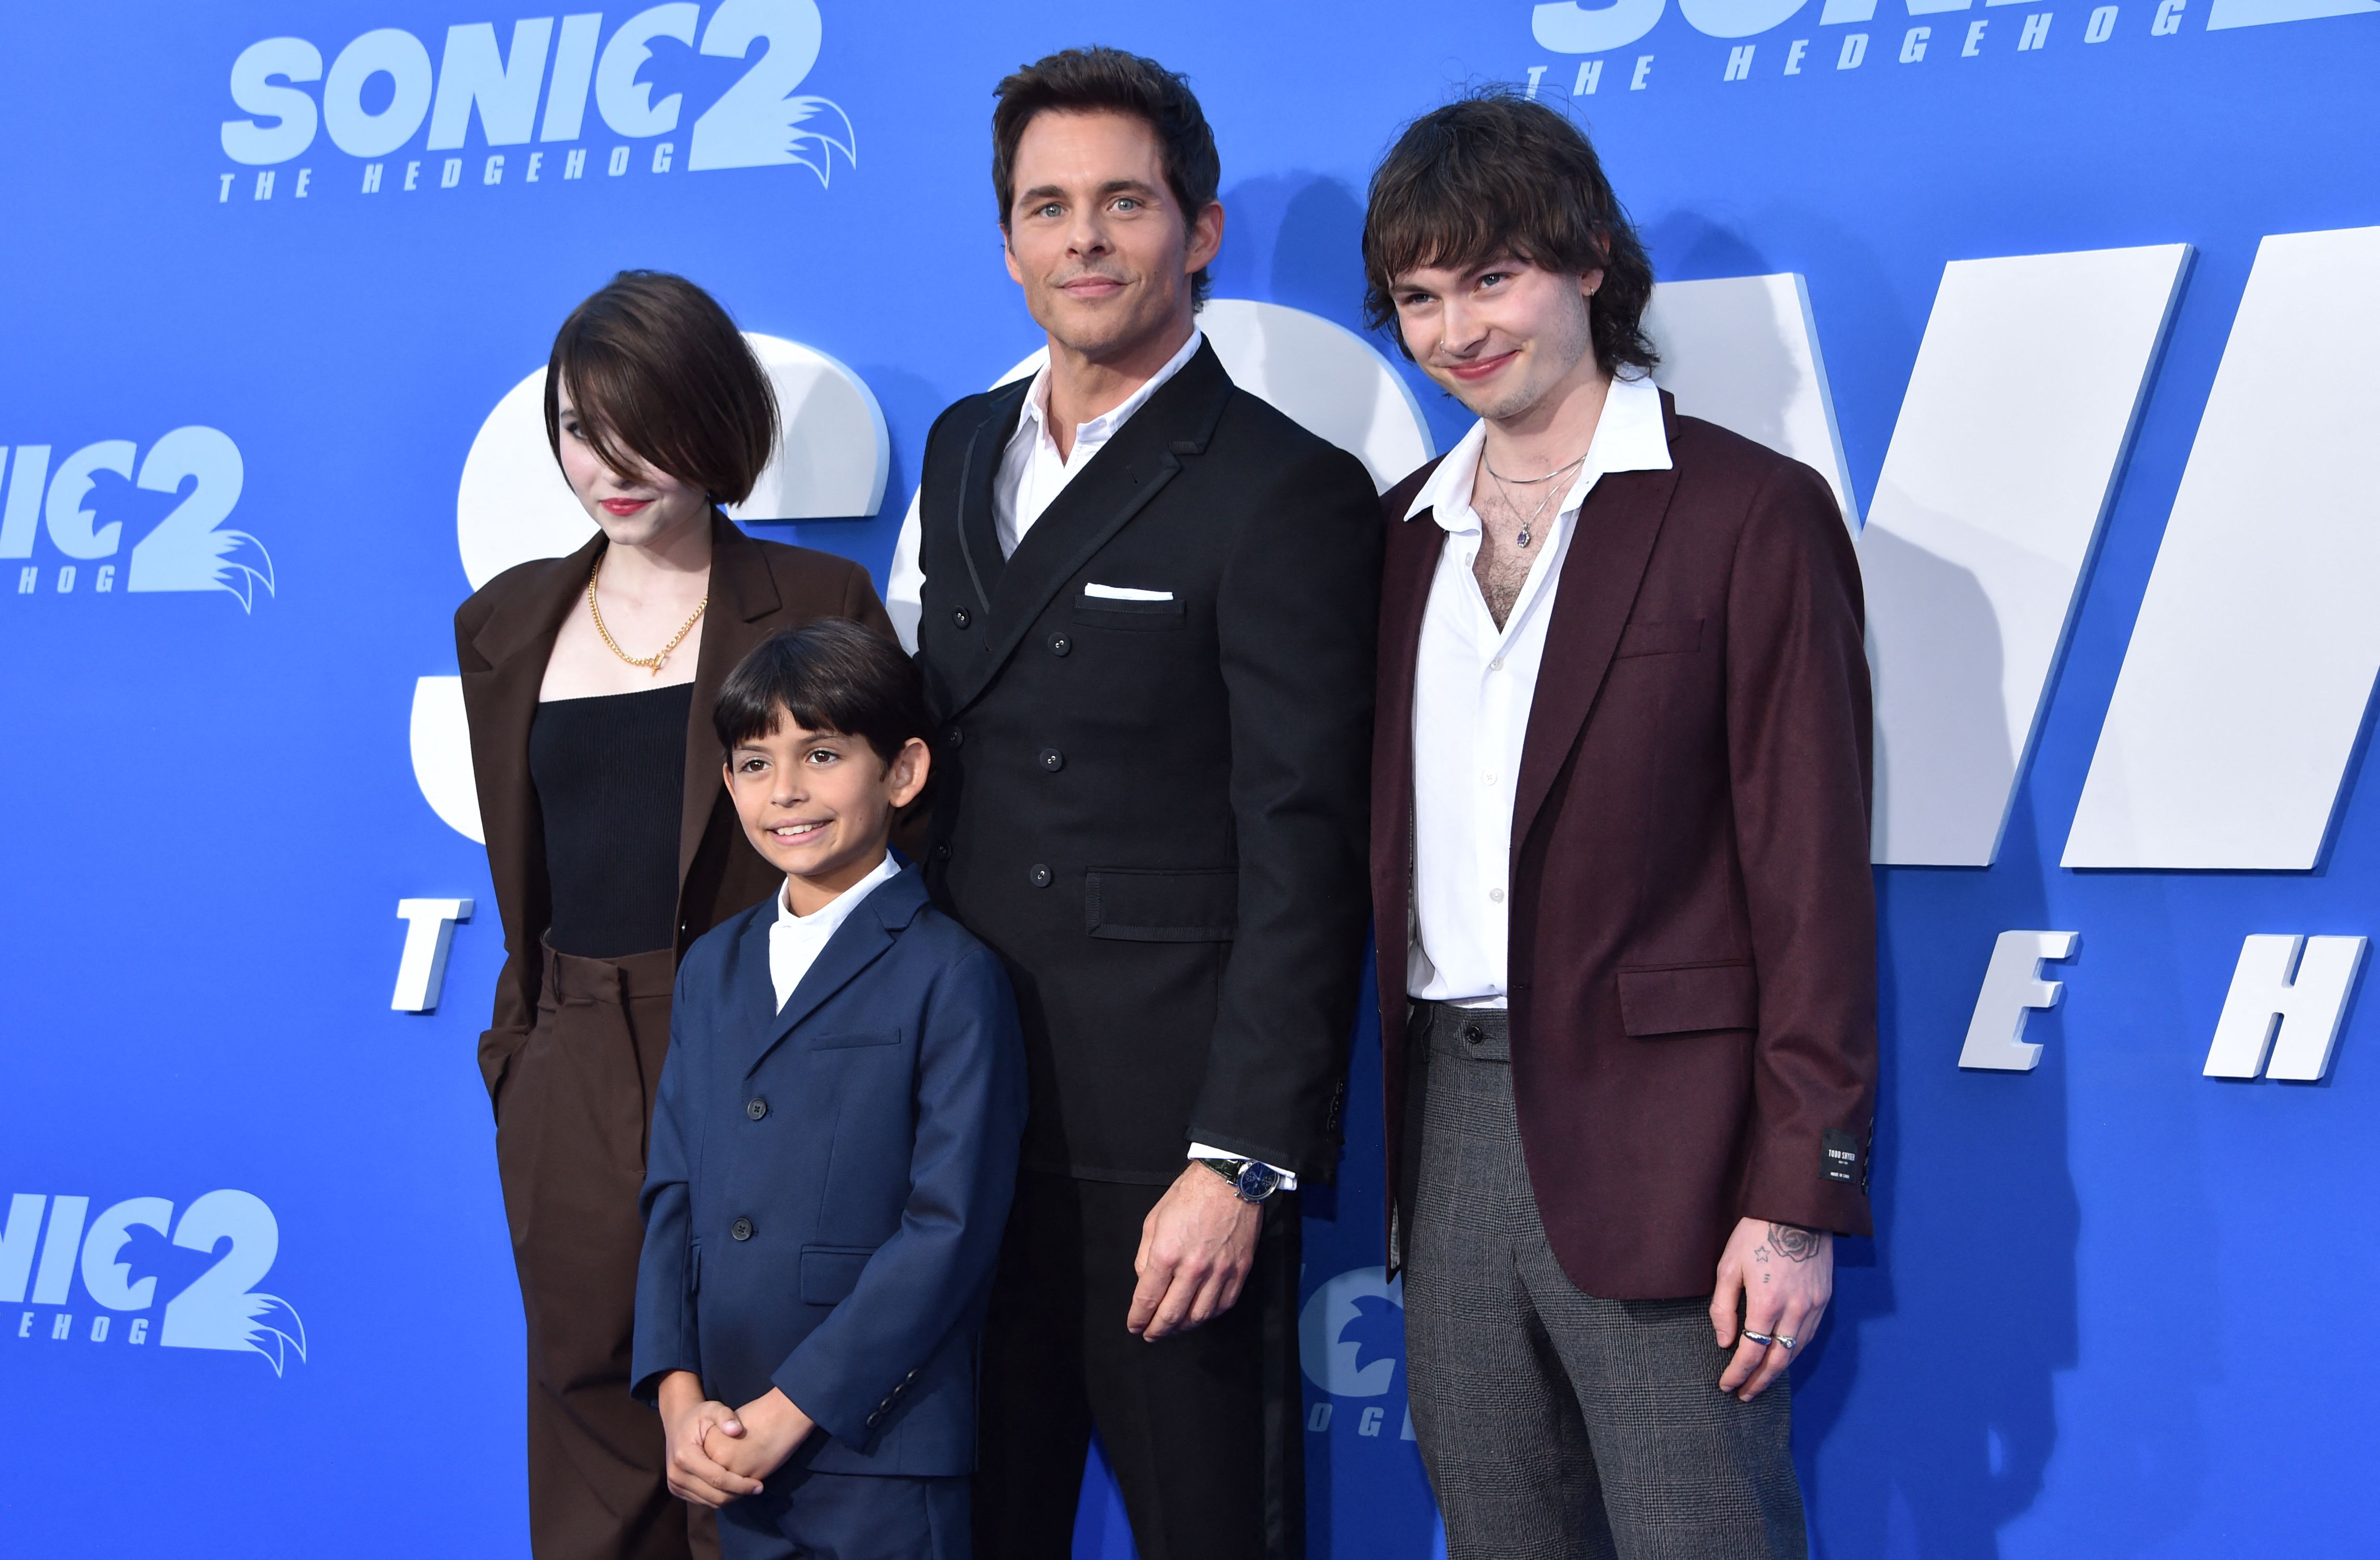 James Marsden surrounded by Jack Marsden (R), Mary James Marsden (L) and William Luca Costa-Marsden (front) at the premiere of "Sonic The Hedgehog 2" at the Regency Village theatre, on April 5, 2022, in Westwood, California. | Source: Getty Images